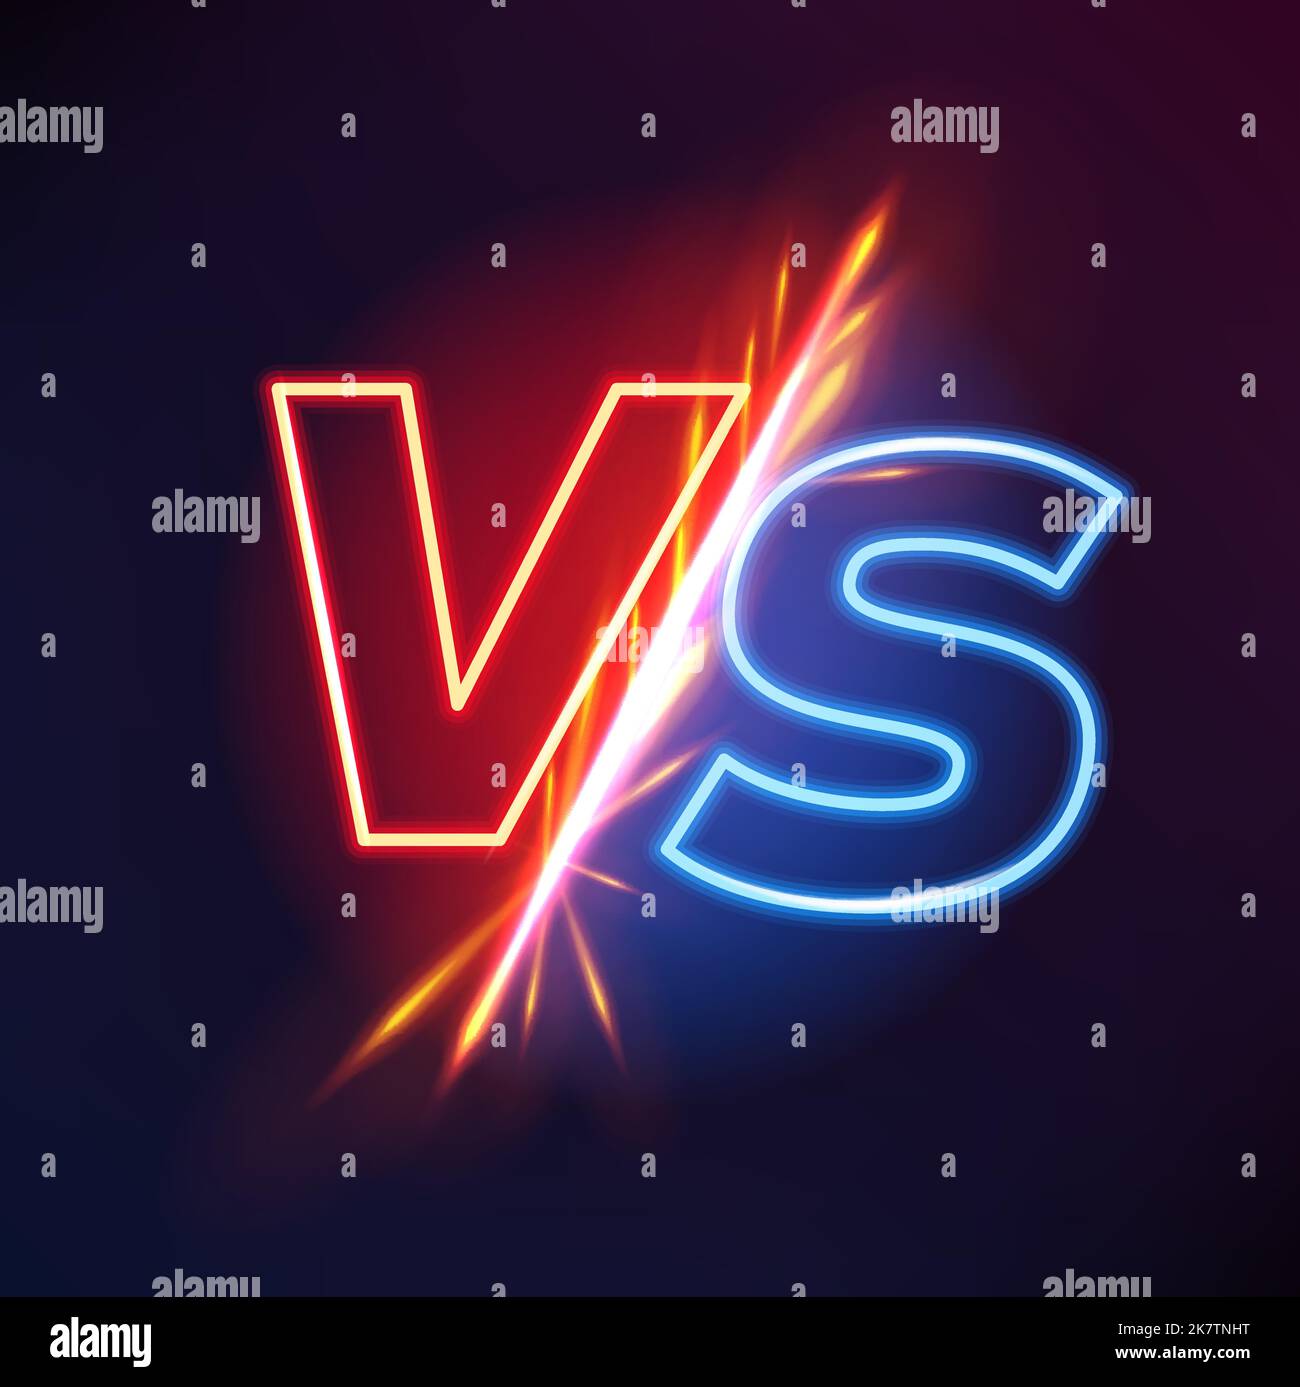 VS or versus sign. Sport competition, championship or contest, mixed martial arts fight or conflict, confrontation clash vector background with glowing neon blue and orange light VS letters Stock Vector